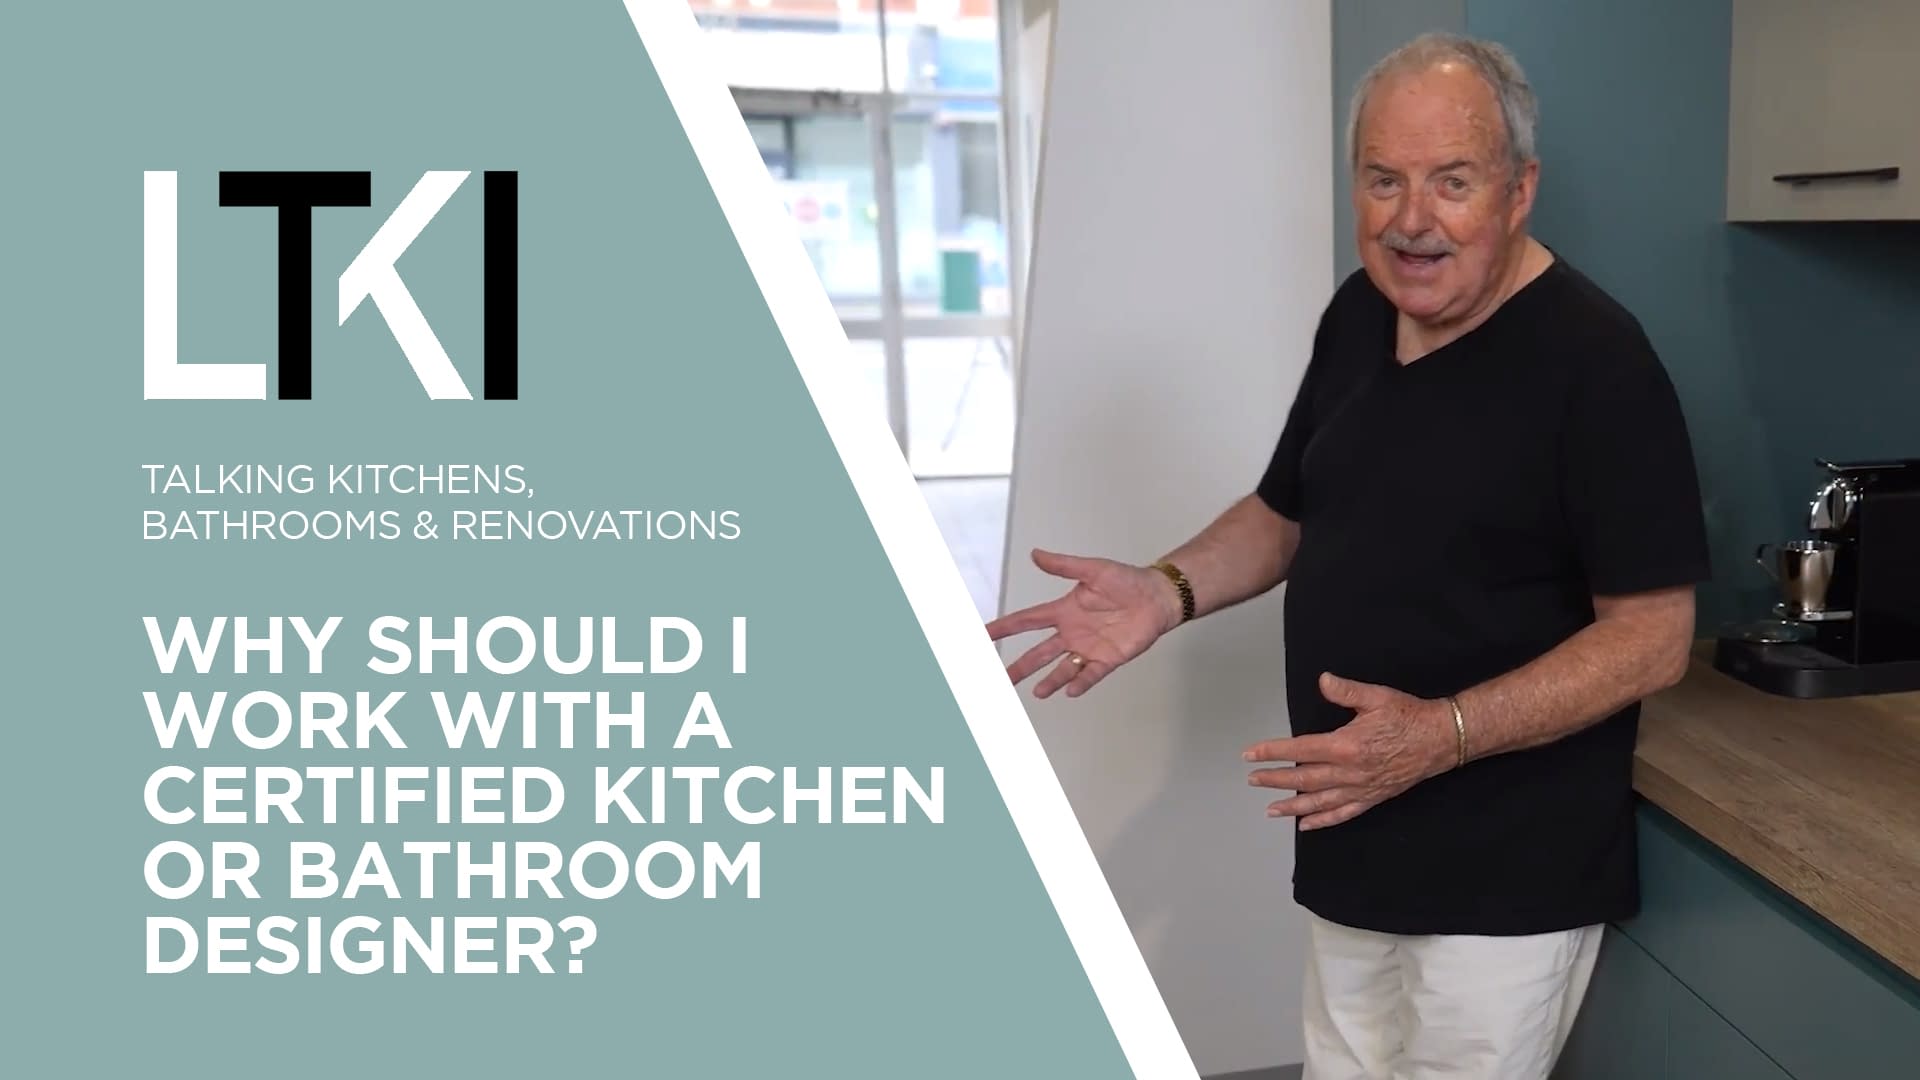  Talking Kitchens, Bathrooms & Renovations: Why Should I Work With A Certified Kitchen Or Bathroom Designer?